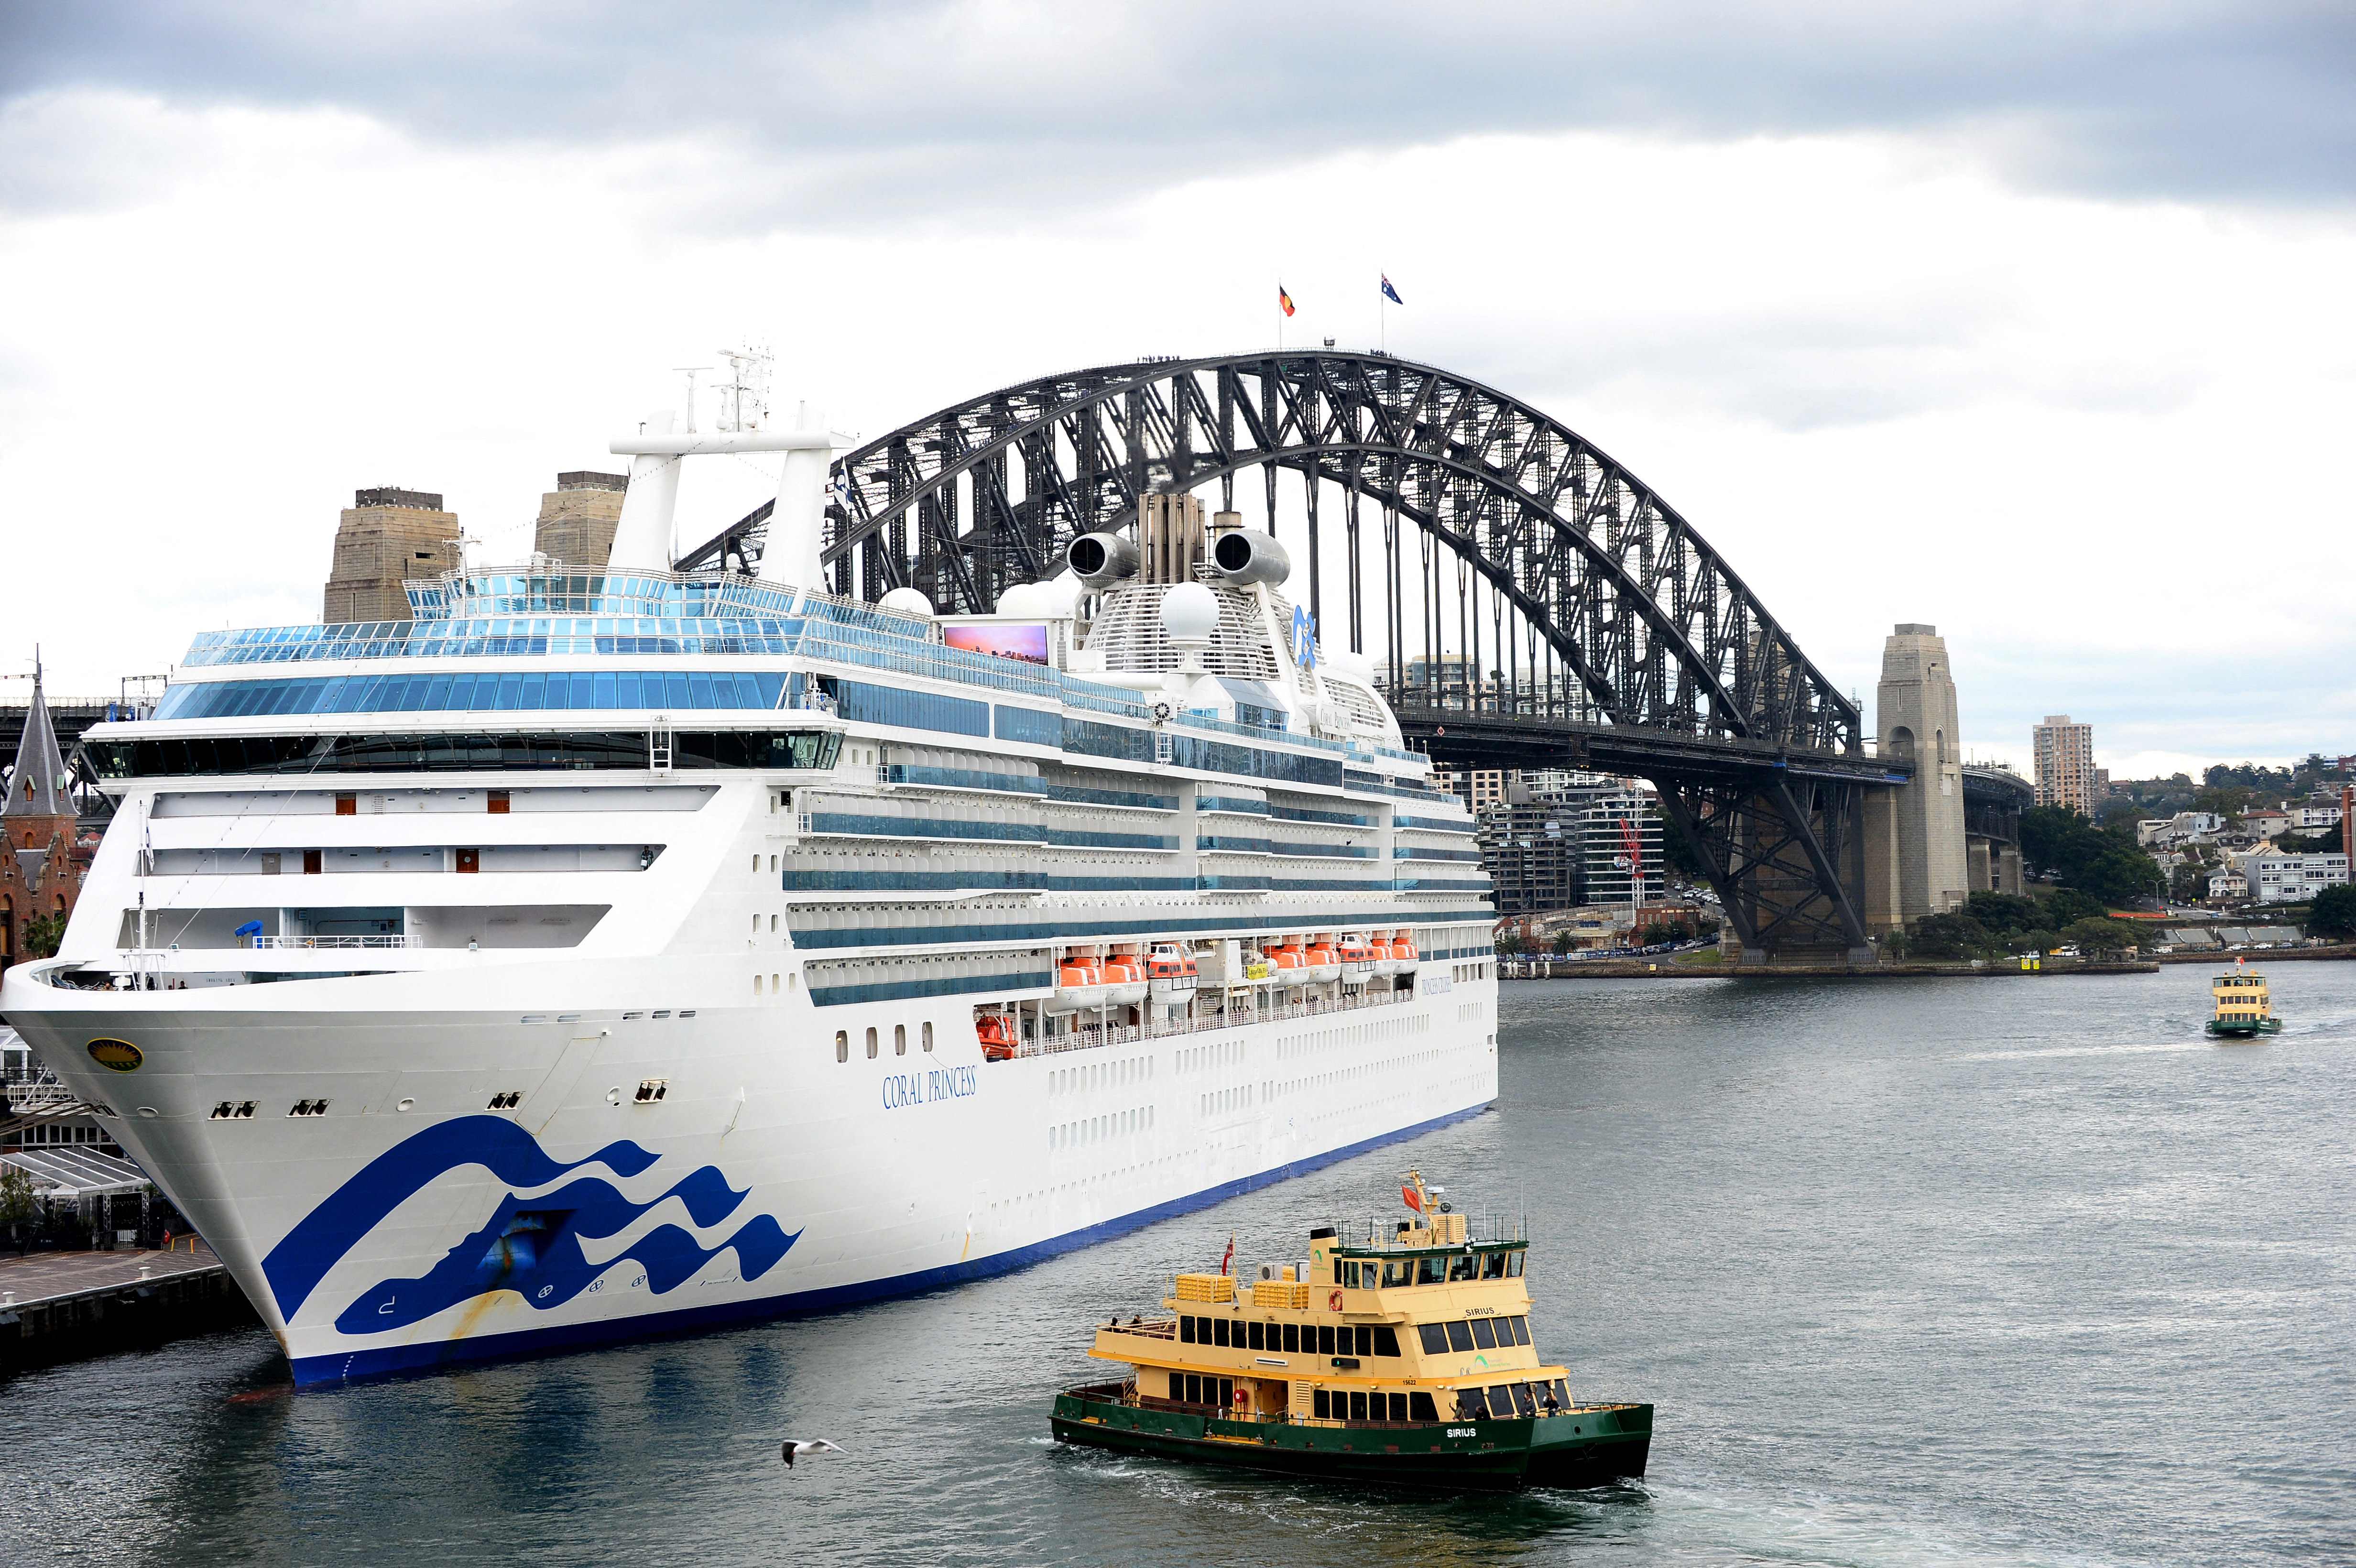 A Covid-19 outbreak on an Australian cruise ship has been branded “inevitable” but has not stopped passengers from enjoying their trip